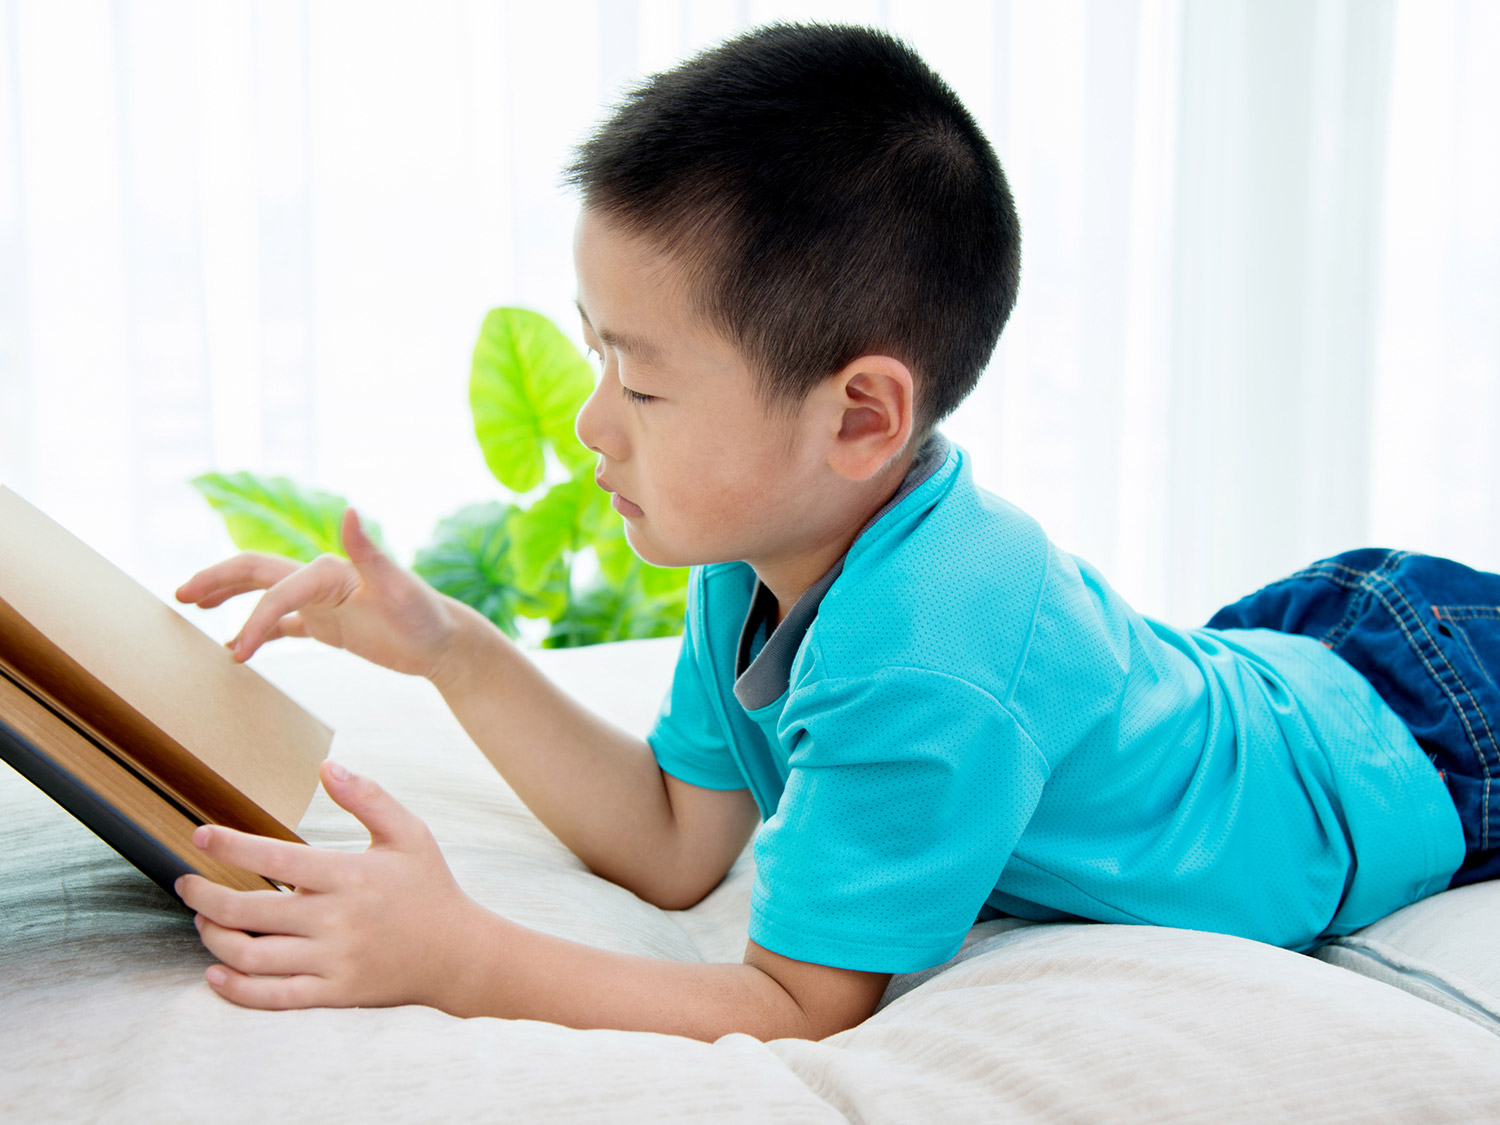 4 Tips to Make Reading Your Child's Go-To Summer Activity